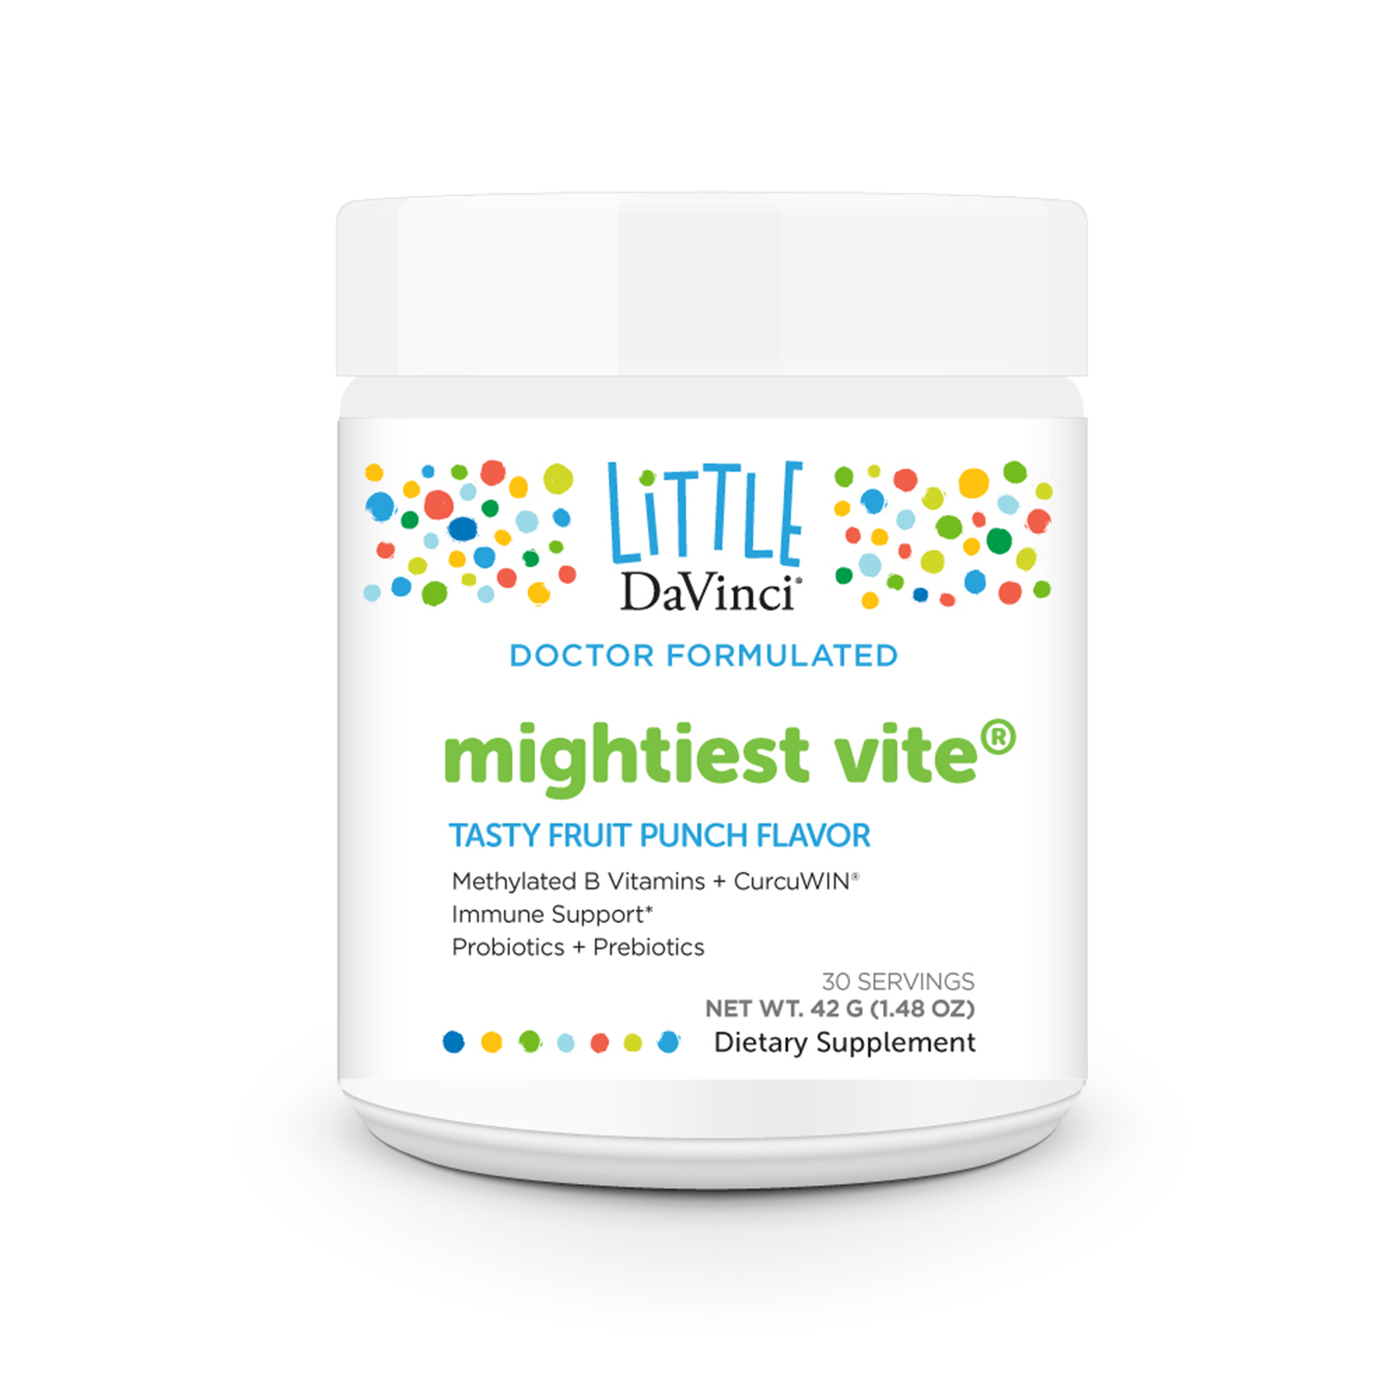 Mighty Vite ings Curated Wellness